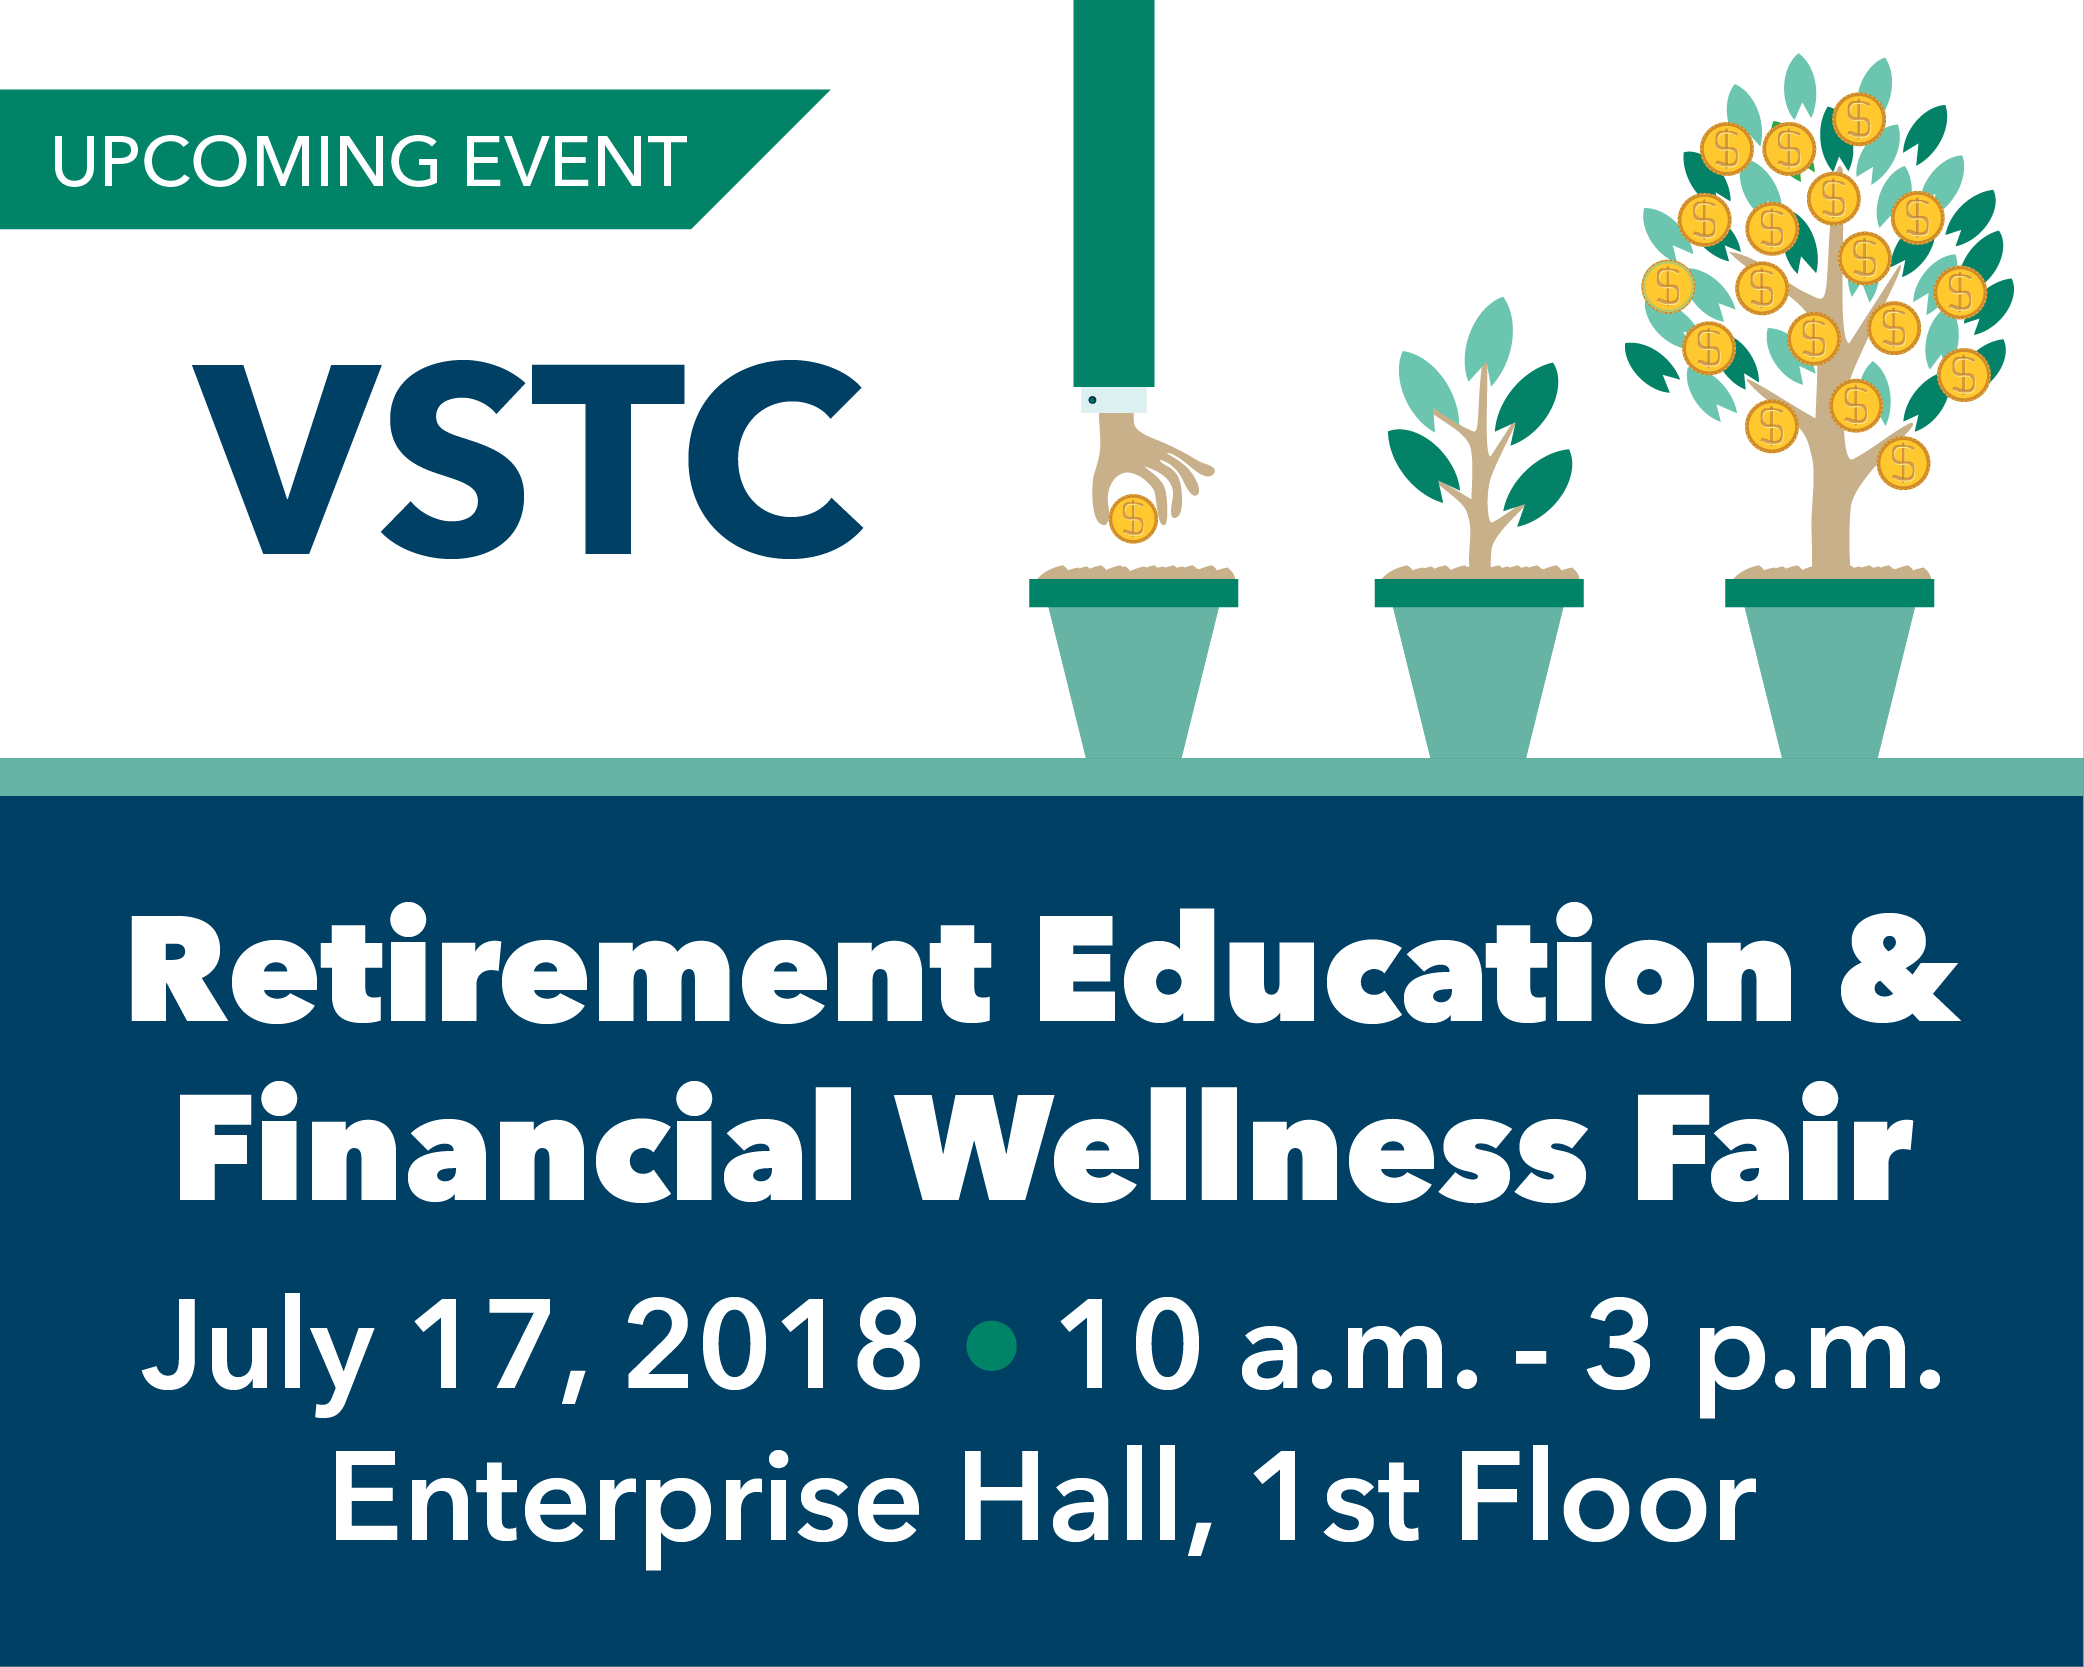 VSTC Retirement Education and Financial Wellness Fair, July 17, 10 a.m. to 3 p.m., Enterprise Hall, 1st Floor